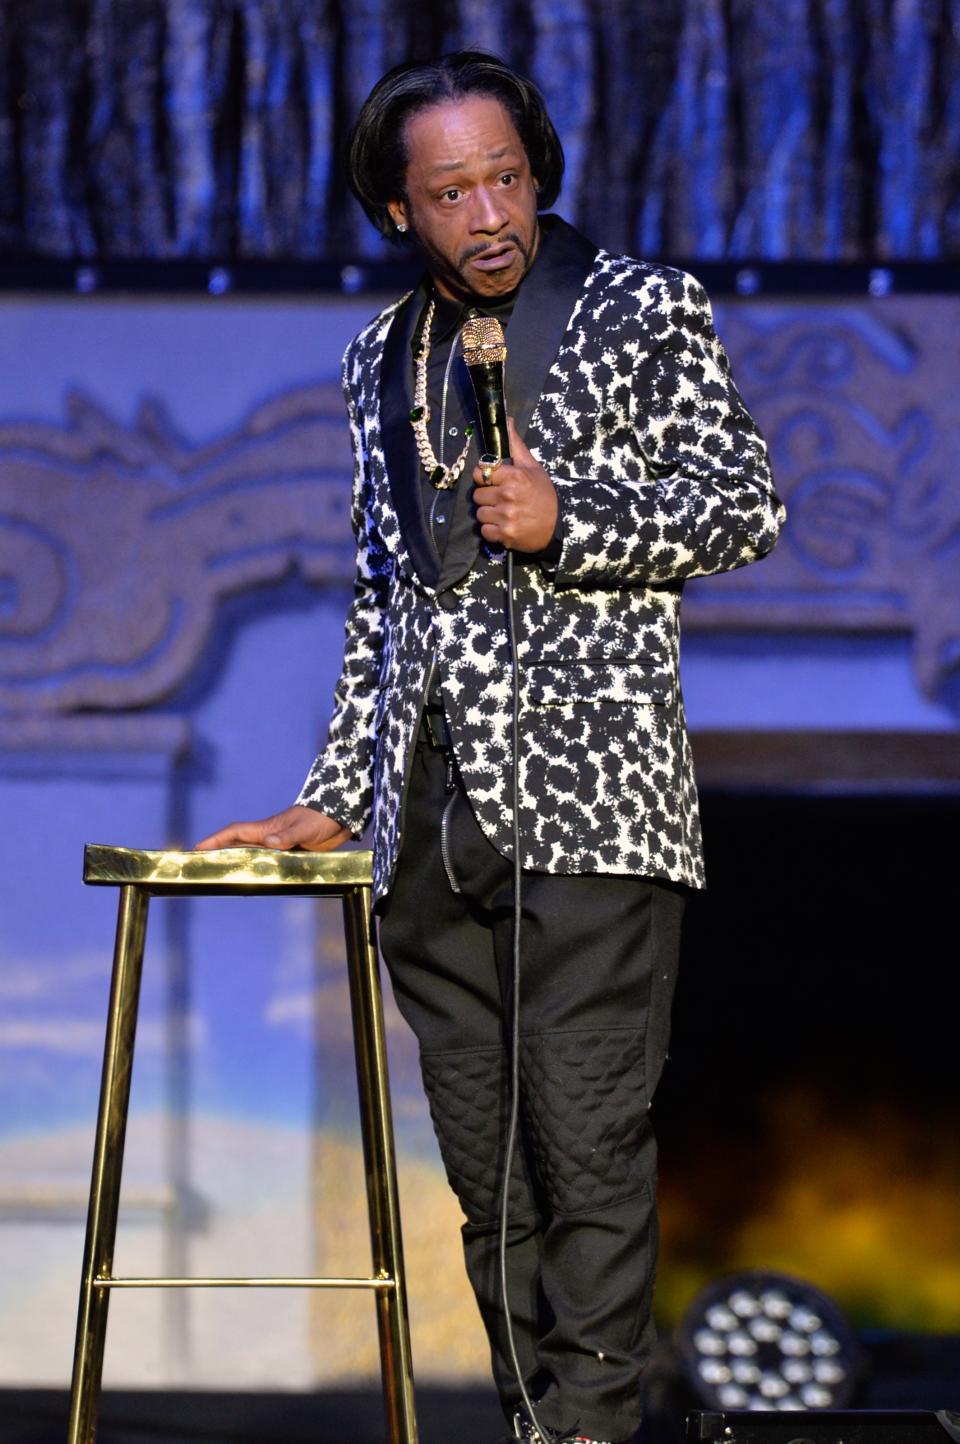 What Did Katt Williams Say About Steve Harvey? Details on the Comedian